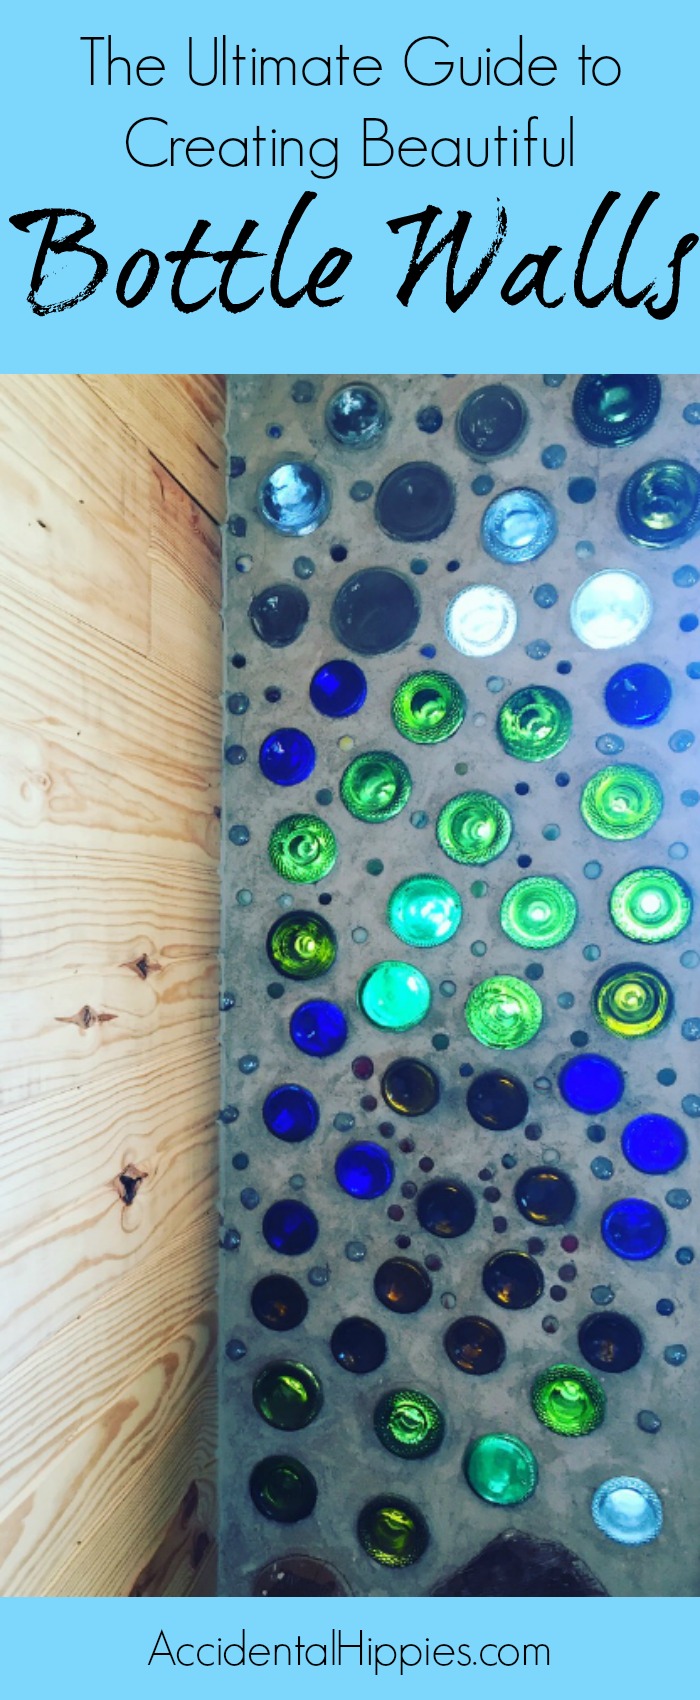 Bottles walls are great in cordwood, cob, and earthship building designs. This guide will show you everything we learned about making and building with bottle bricks so that you can do it too.